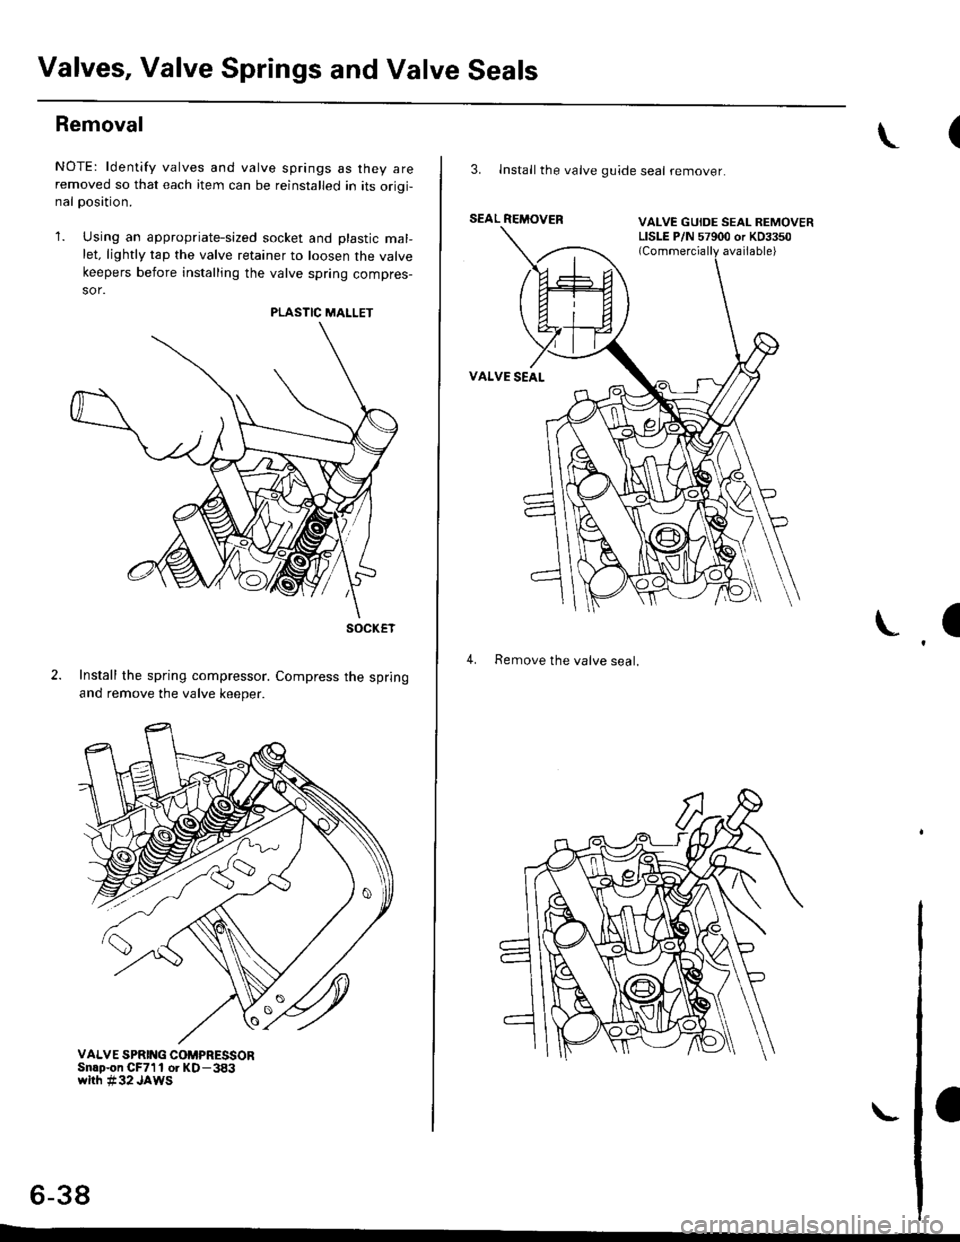 HONDA CIVIC 1996 6.G Workshop Manual Valves, Valve Springs and Valve Seals
Removal
NOTE: ldentify valves and valve springs as they areremoved so that each item can be reinstalled in its orioi-nal oosition.
1. Using an appropriate-sized 